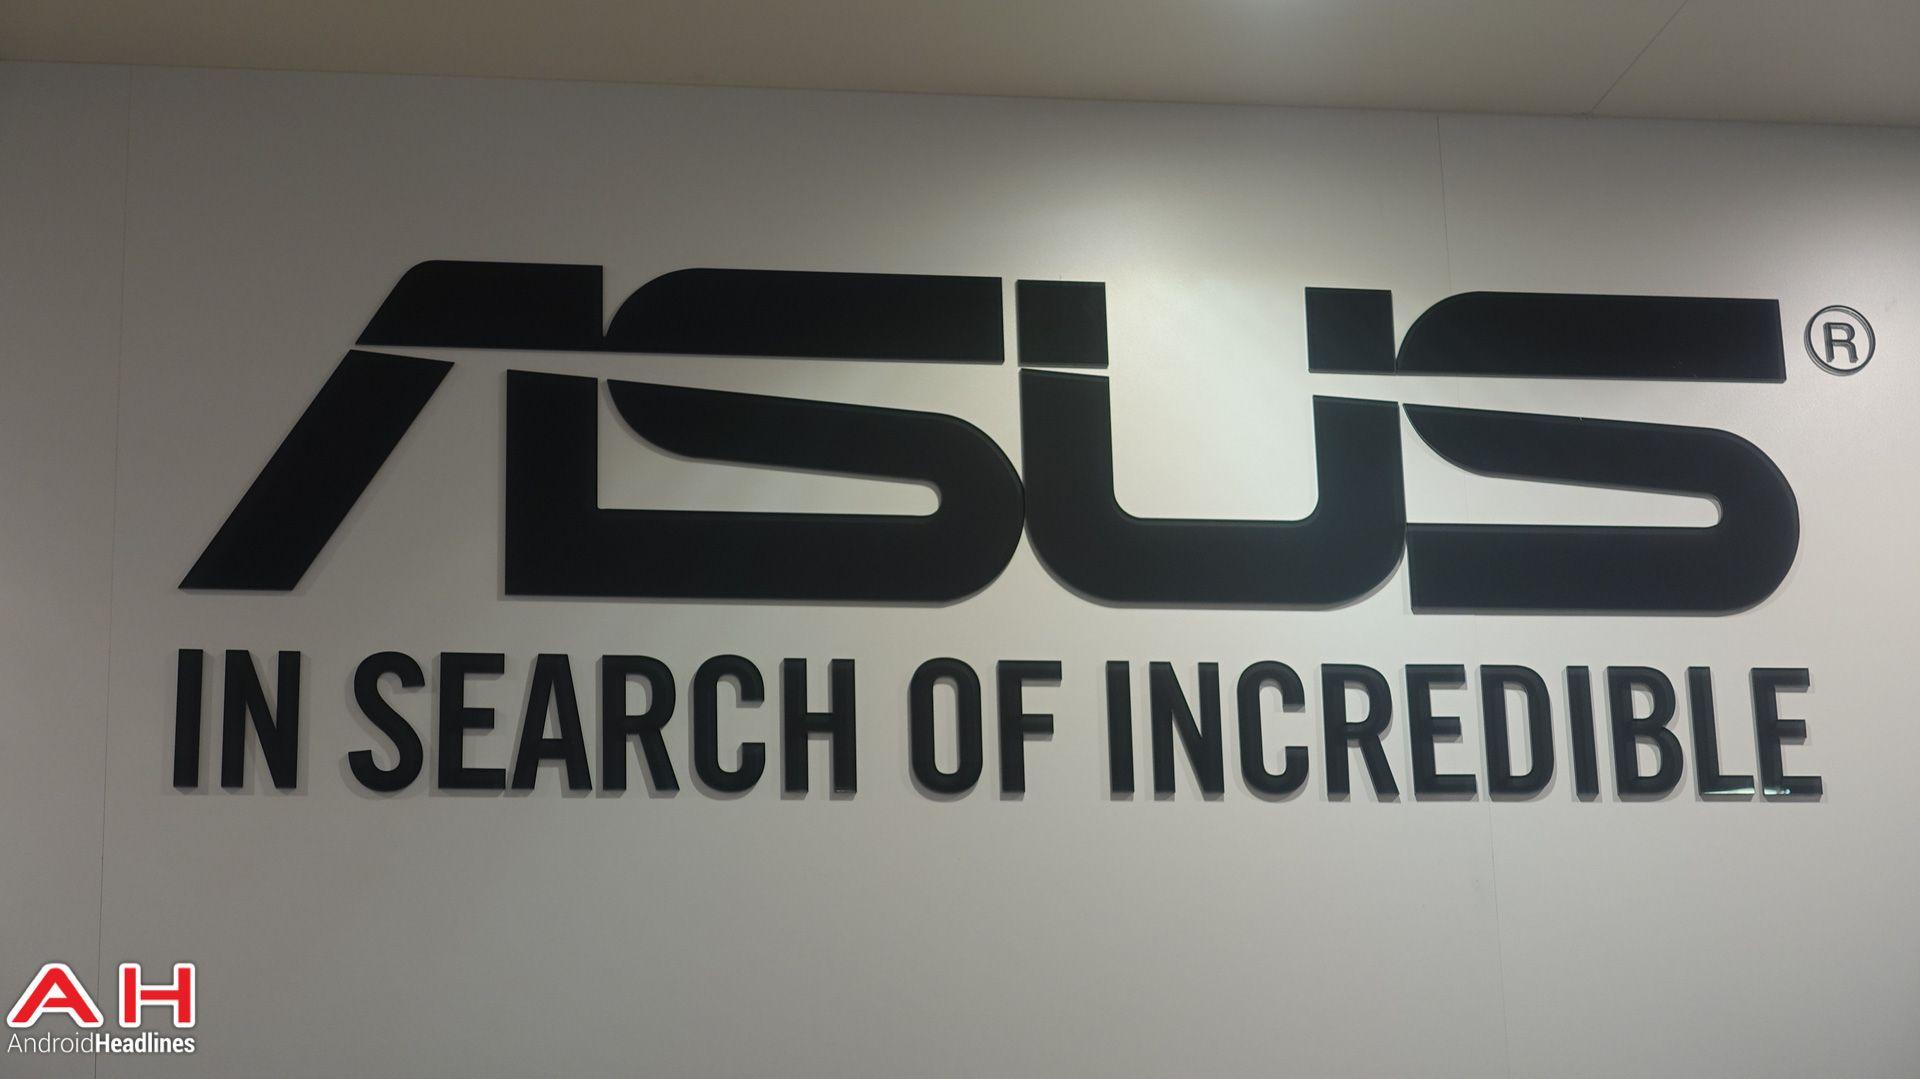 Asus Company Logo - ASUS Lowers Q2 Revenue Goal As Smartphone Demand Drops. Android